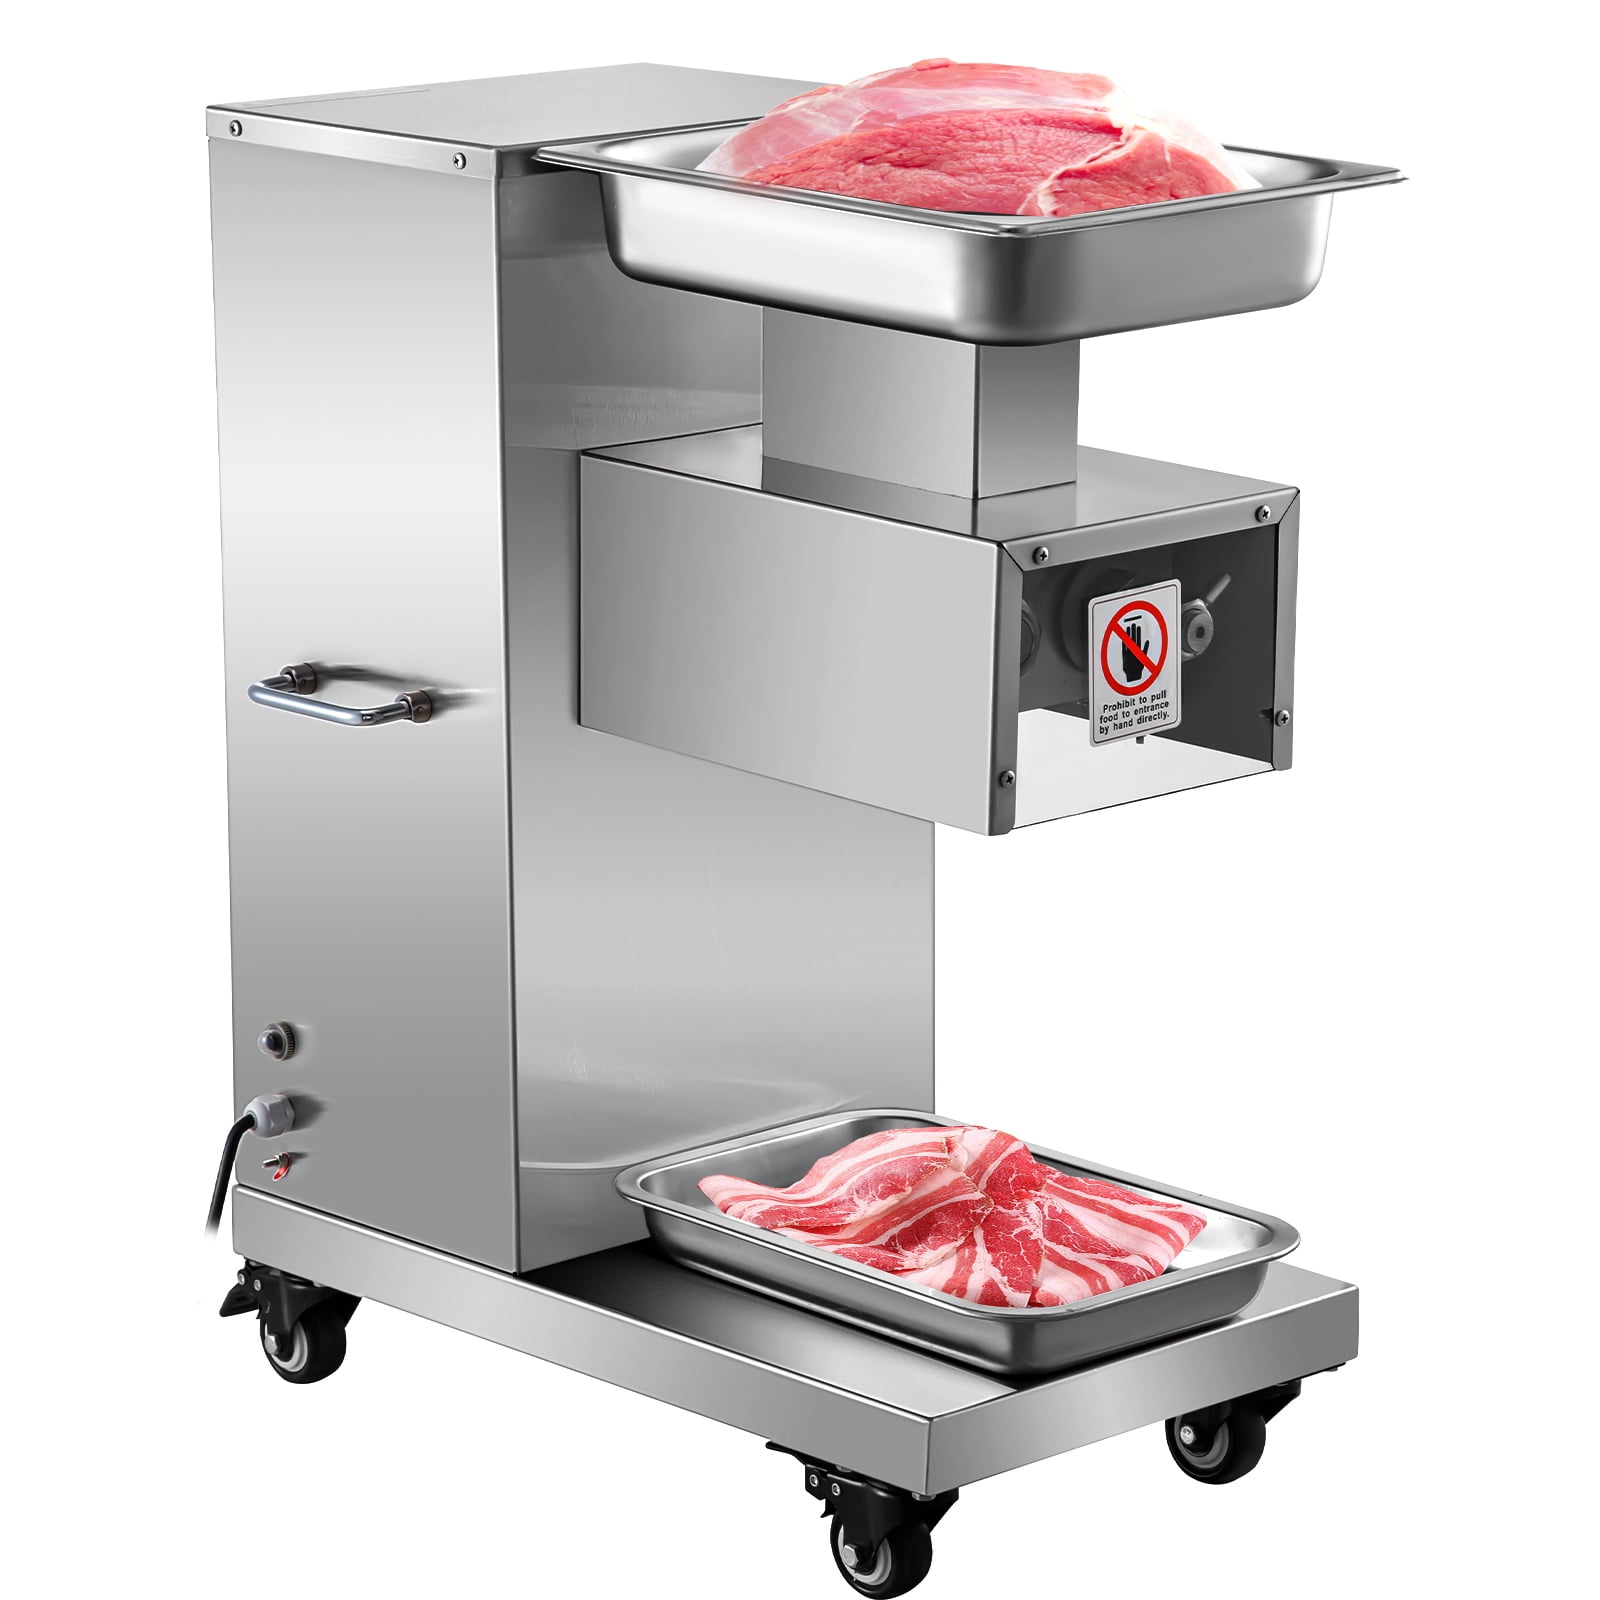 Details about   Electric Slicer Lamb Cutting Machine Household Electric Cut Mutton Roll Cut Frui 